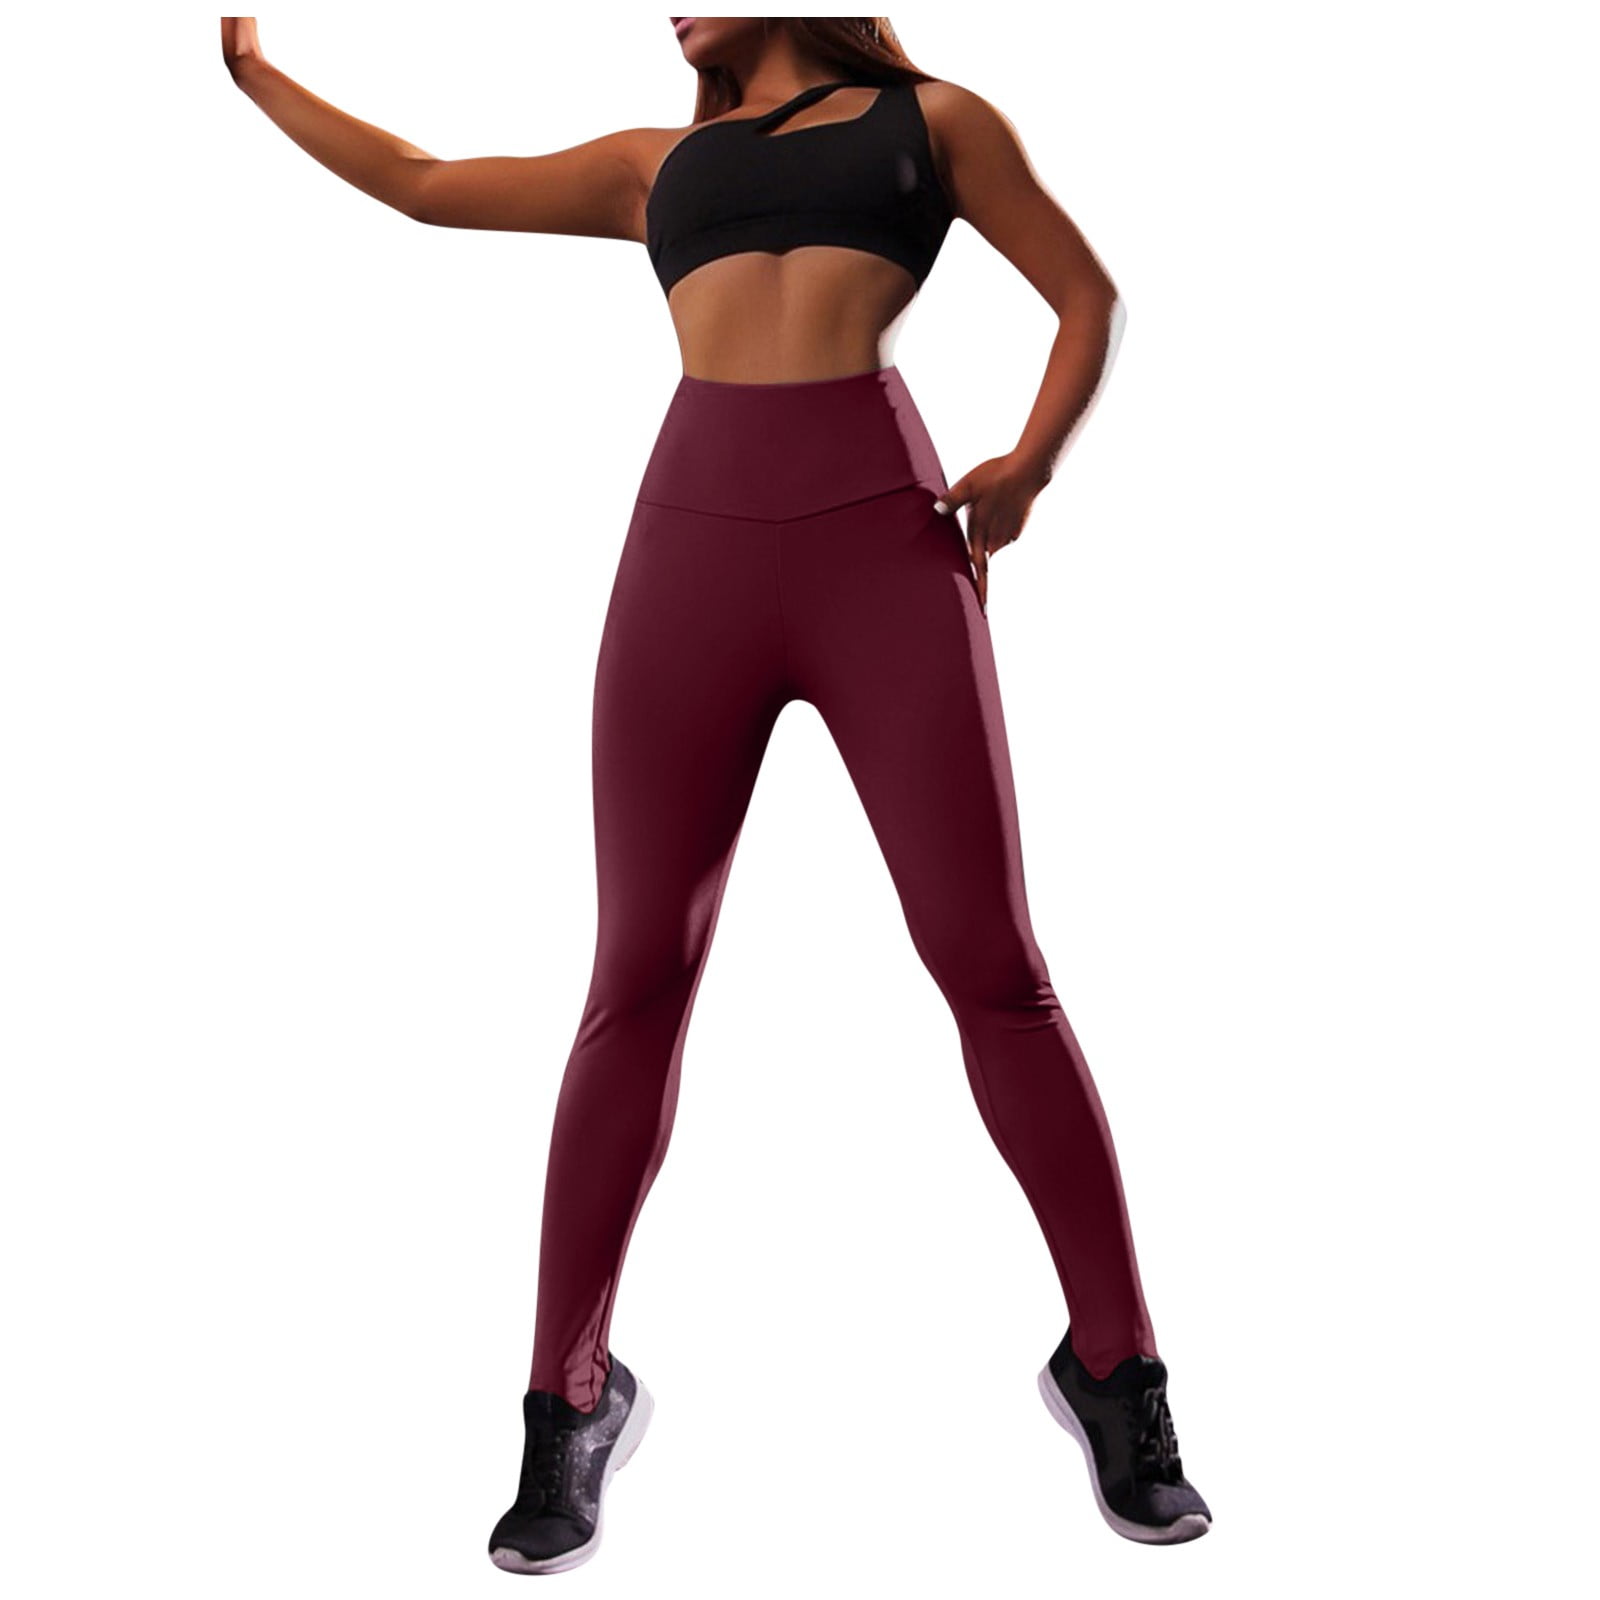 Hiskywin Yoga Pants Womens Extra Large Maroon Stretch Waist Athleisure 31x31